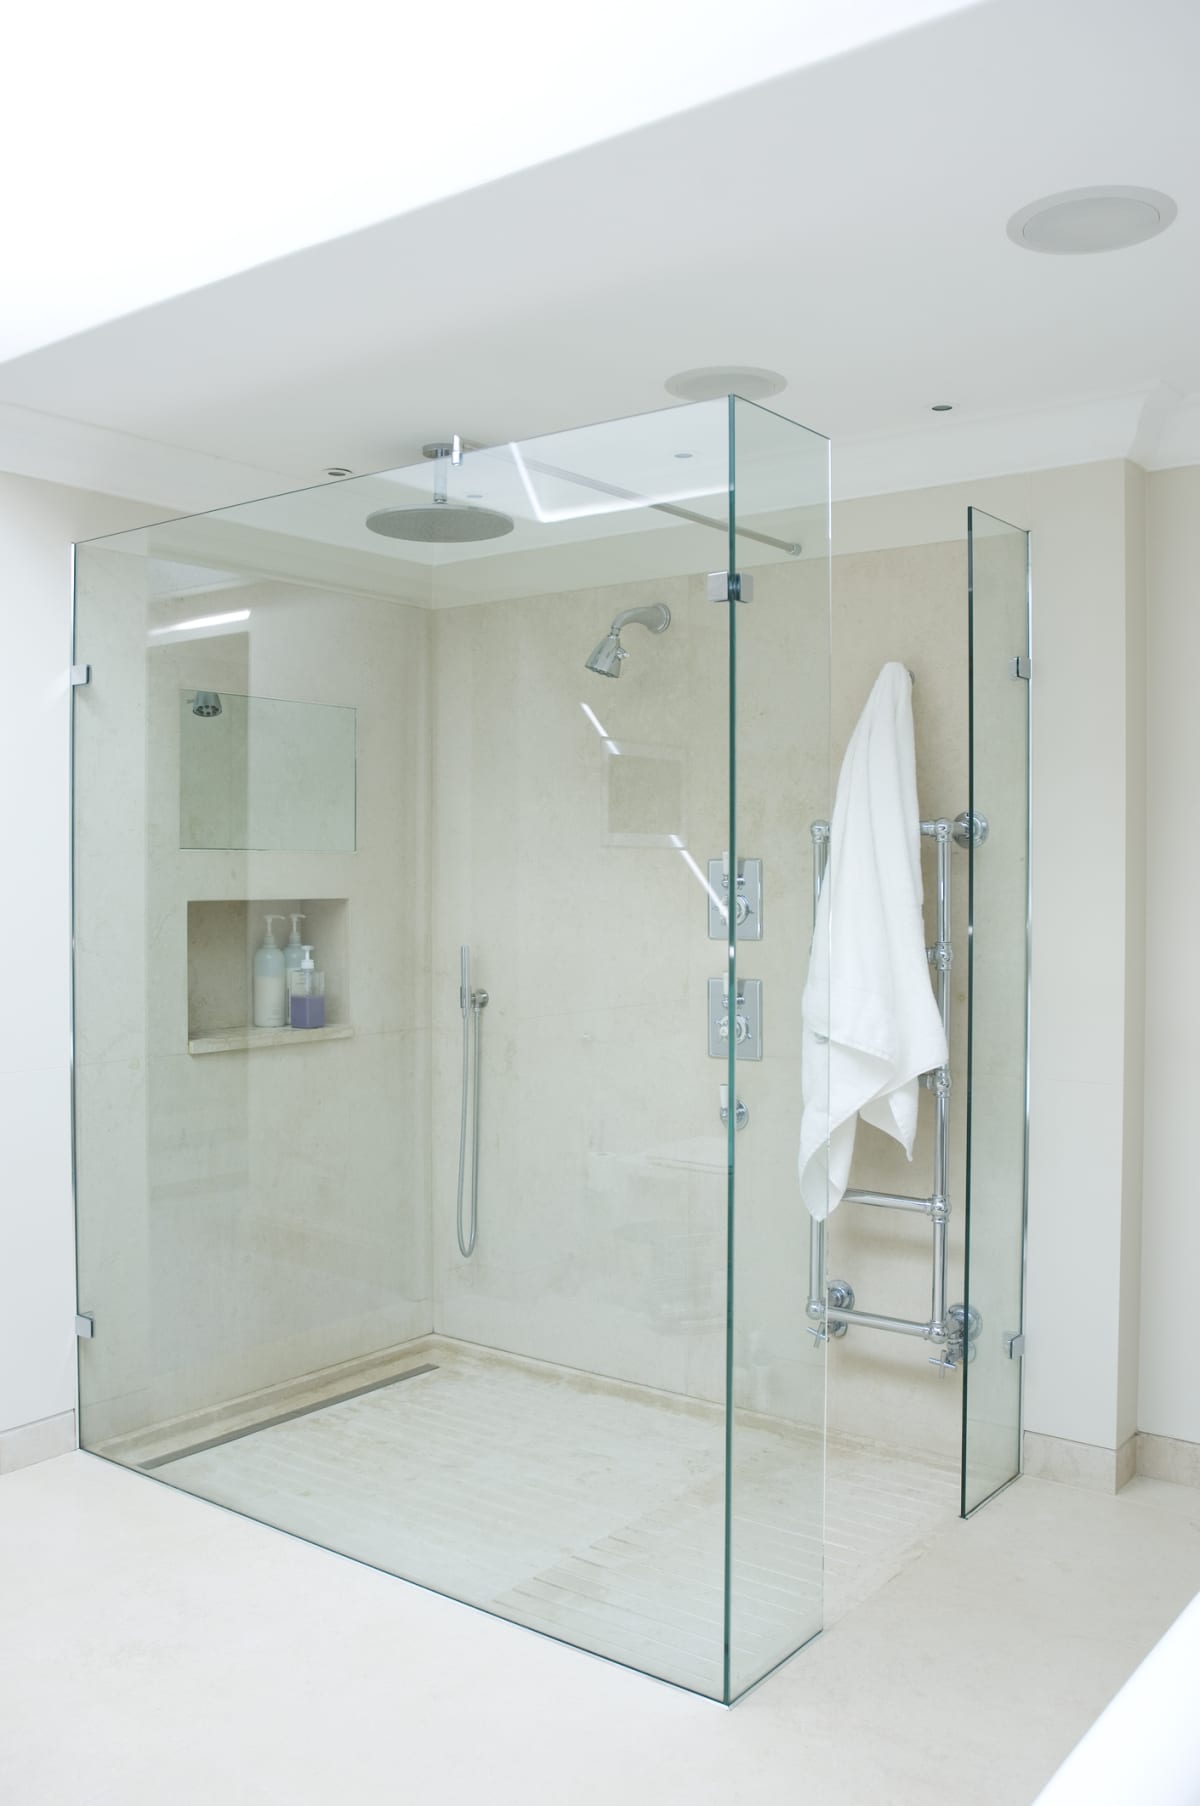 A glass walled shower stall